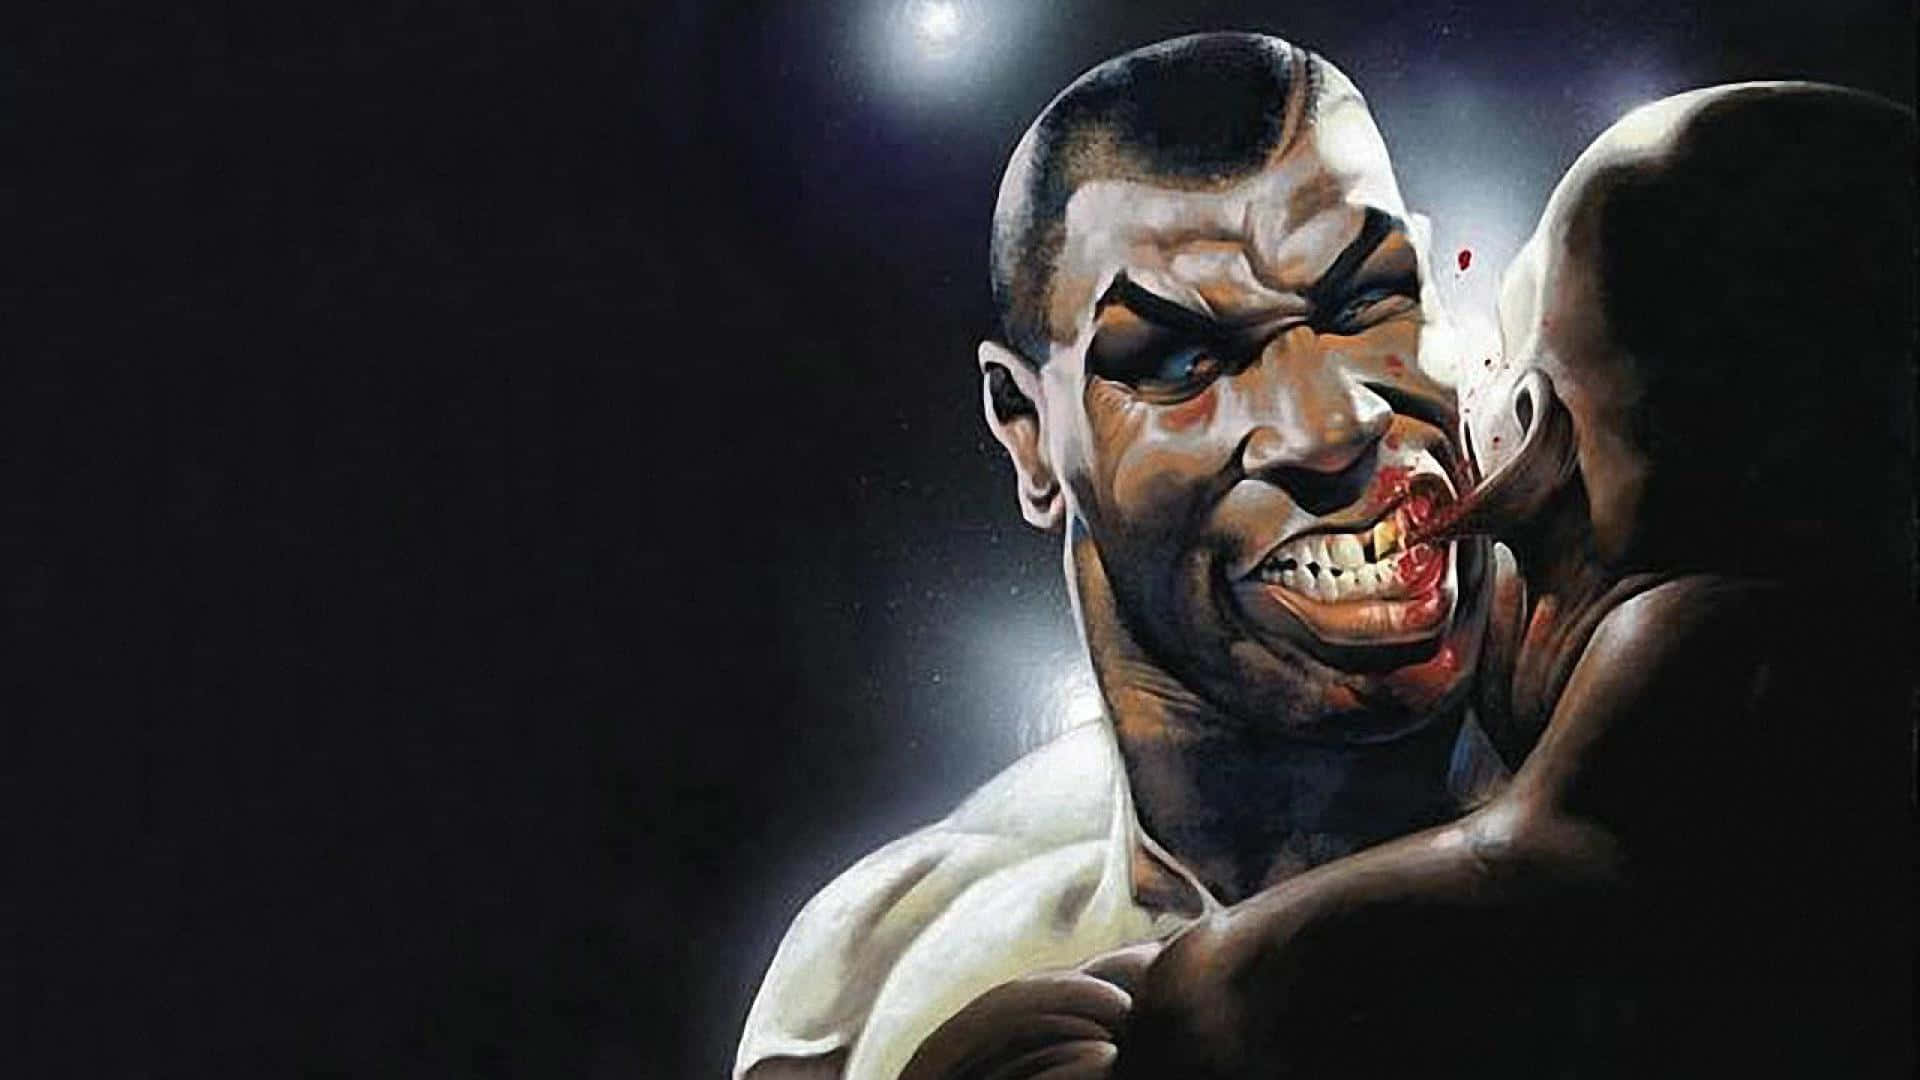 A fierce Mike Tyson in his prime|